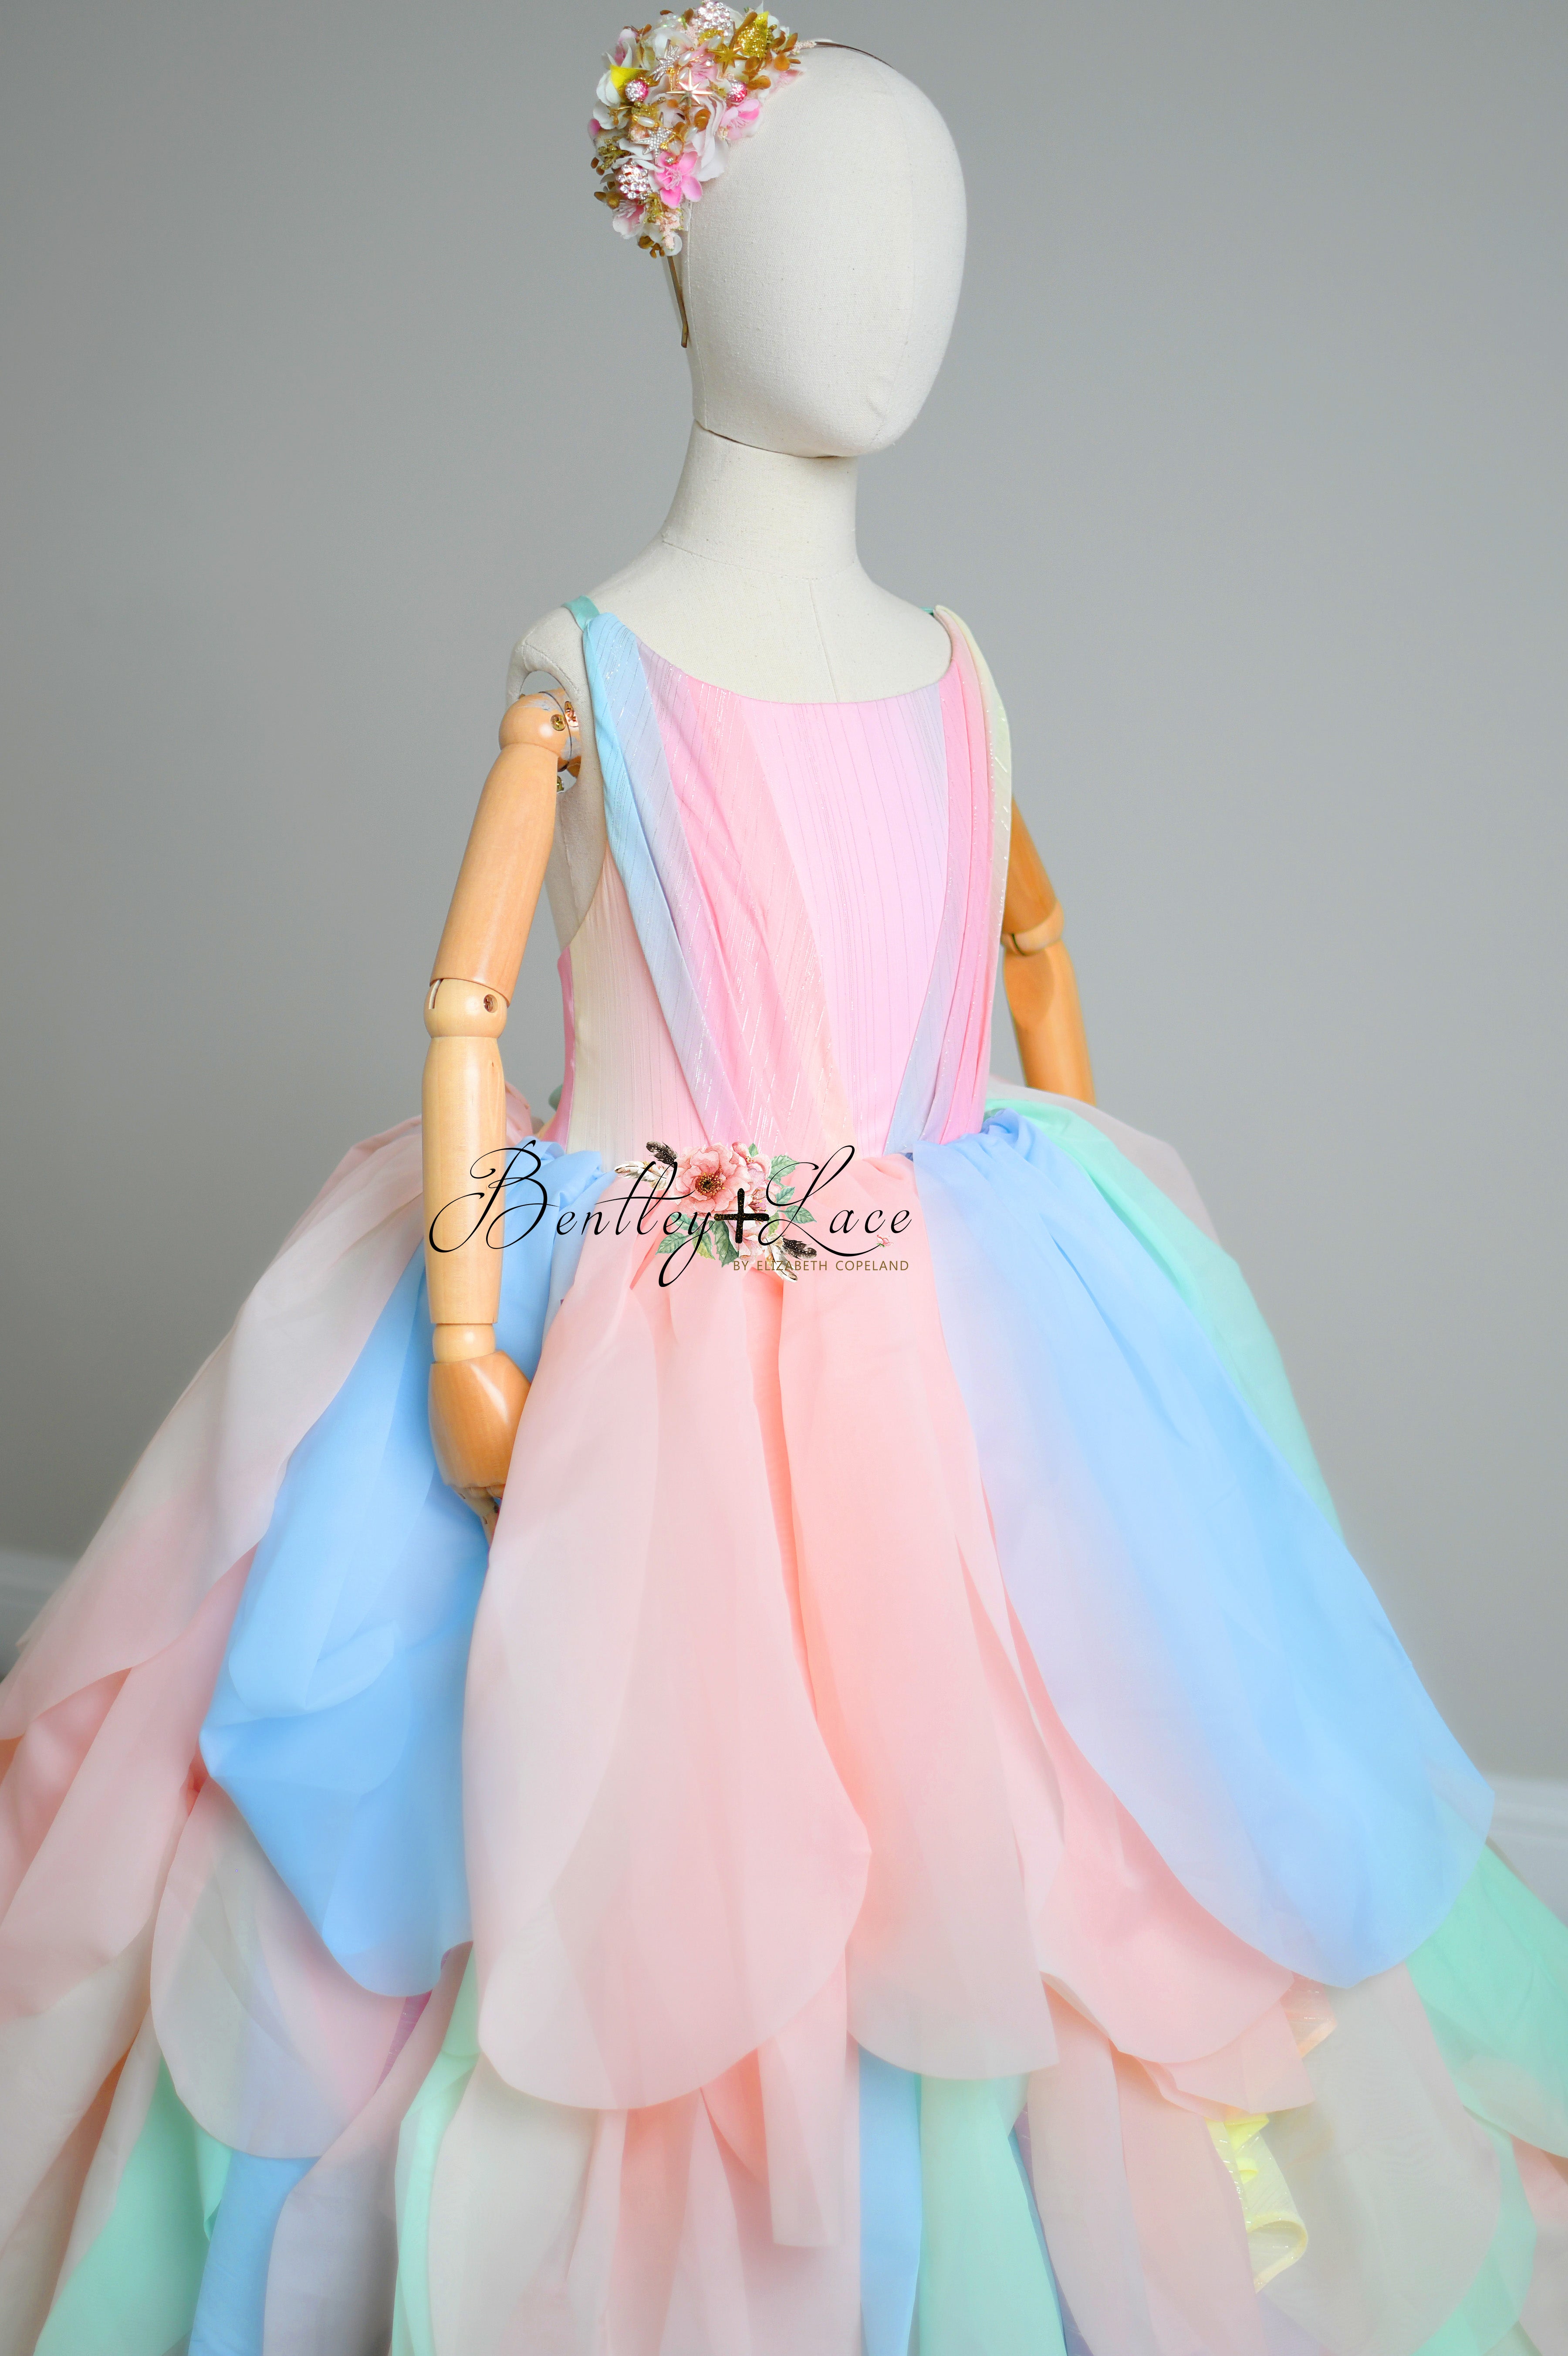 Limited Edition Couture Rental Gown "Petal Whispers" Pastel -  Floor Length Dress  ( 7 Year - Petite 10 Year)